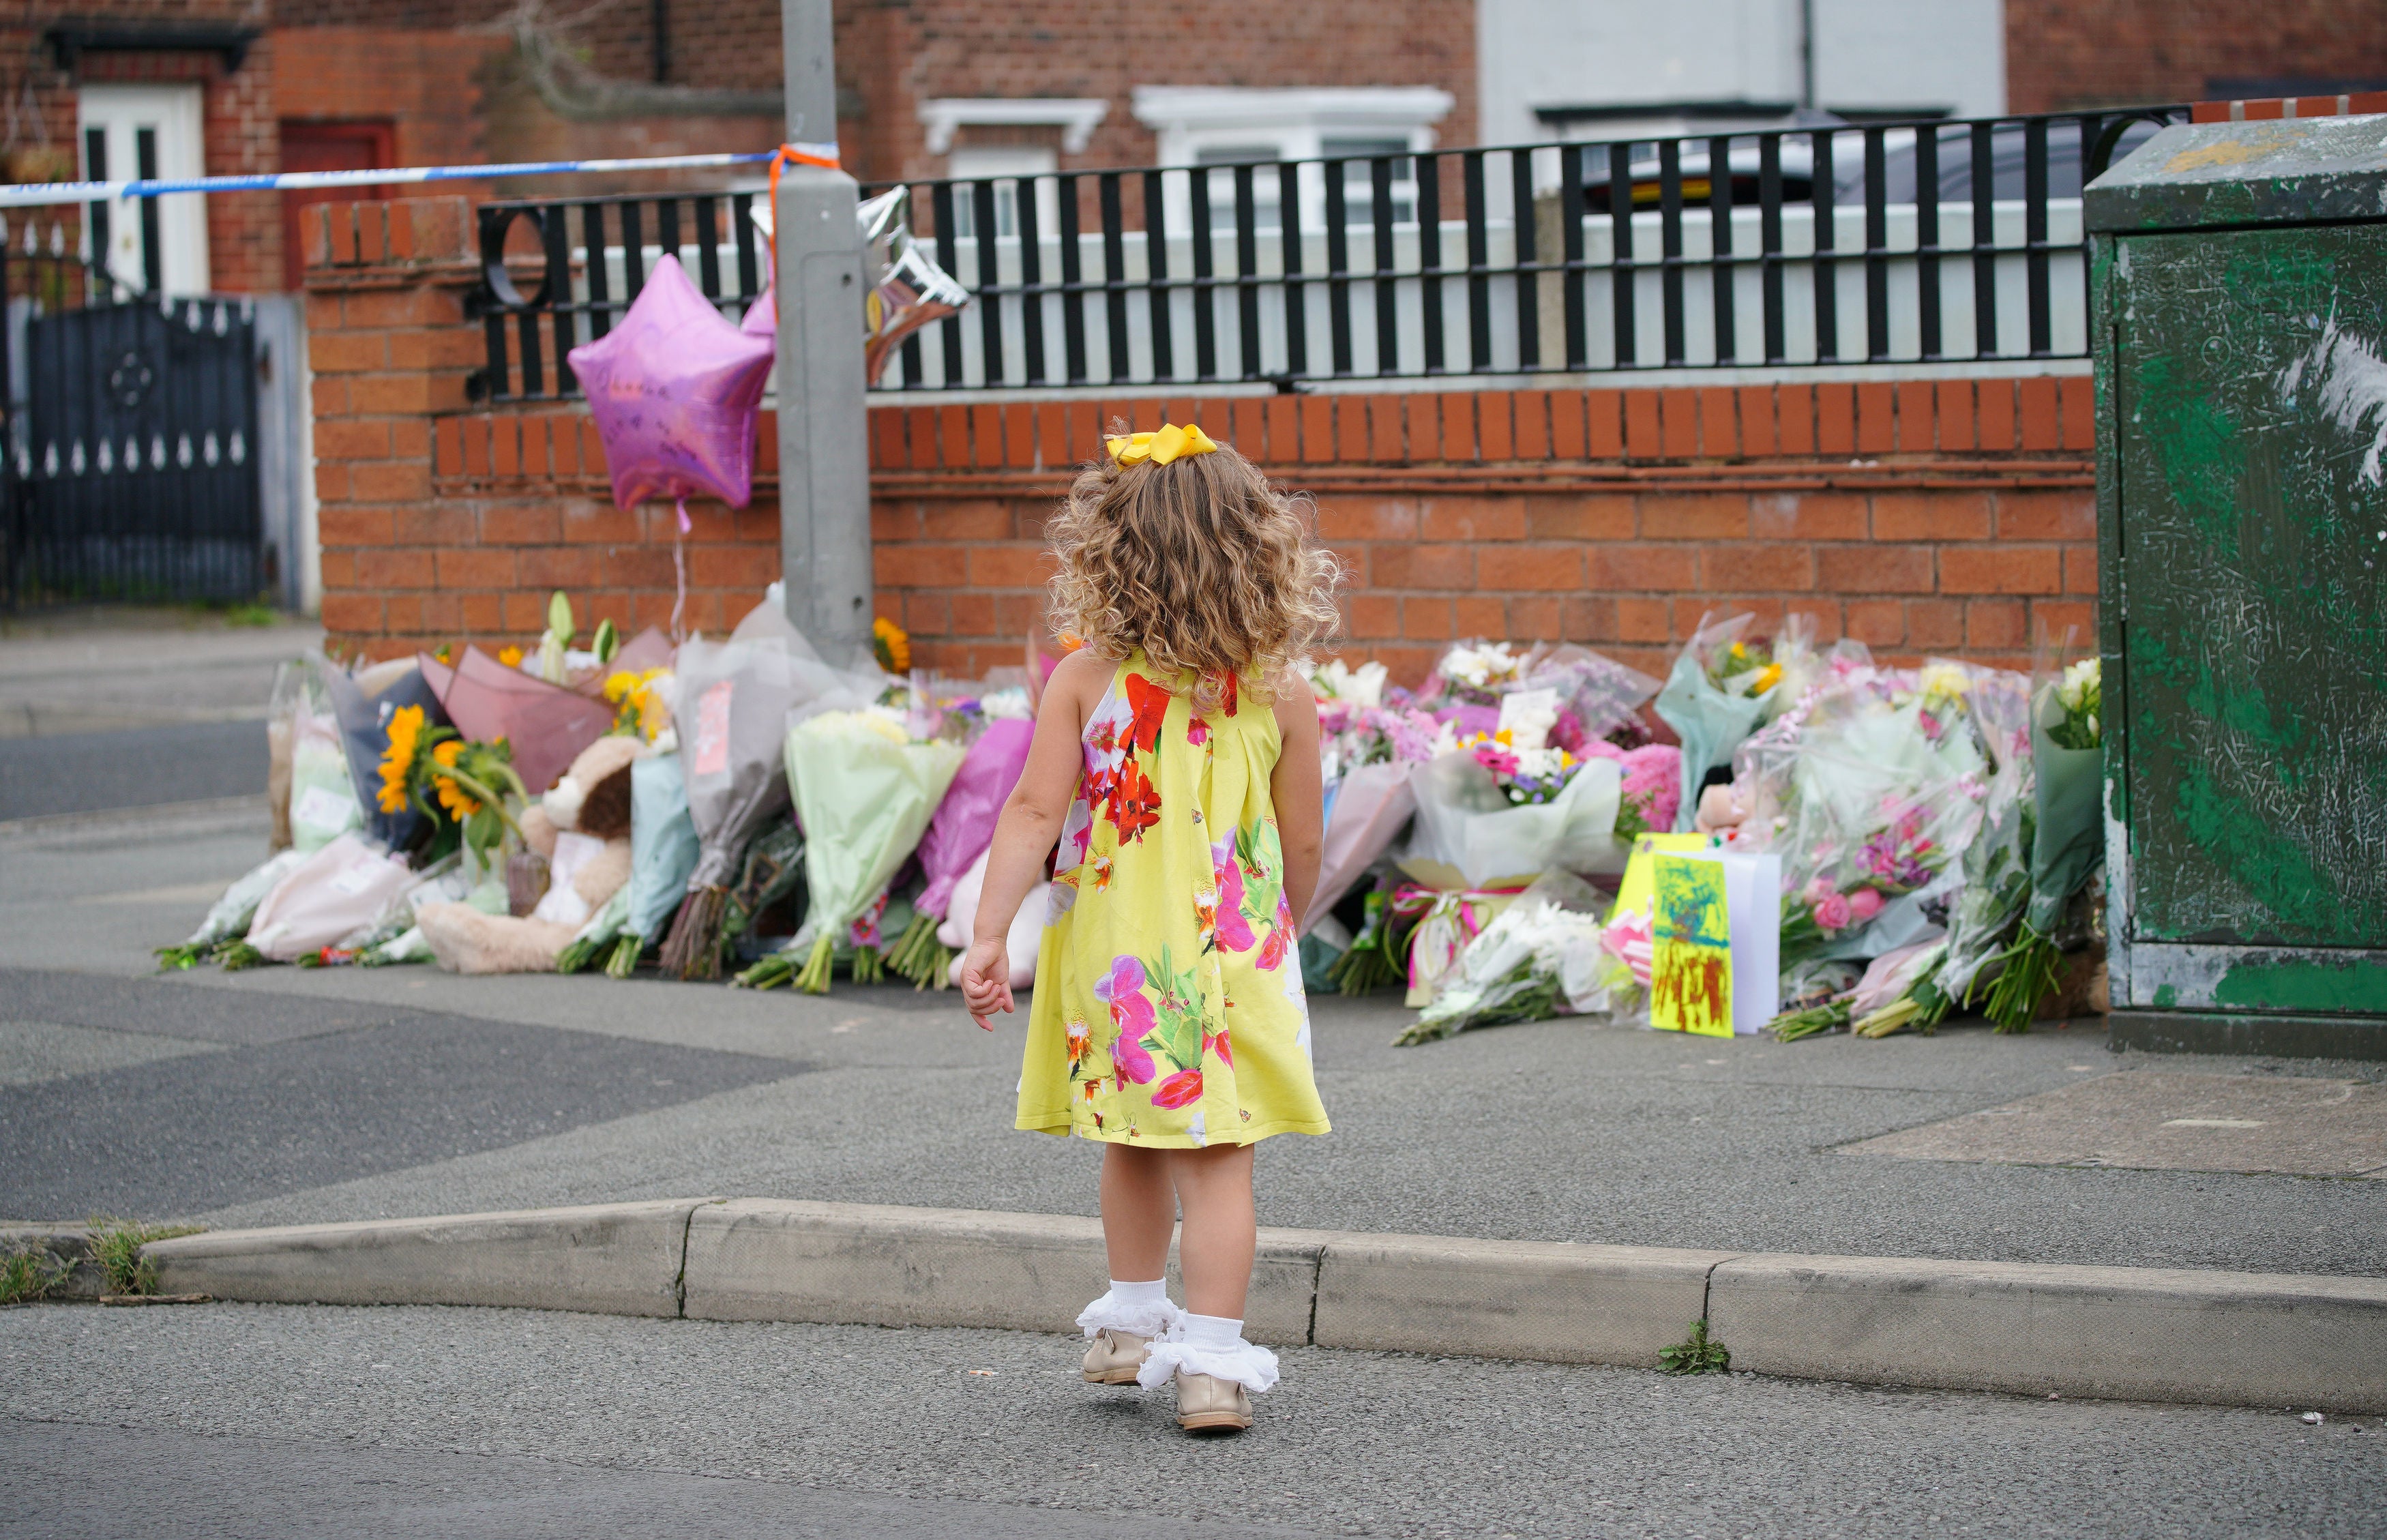 A young girl lays a tribute in Kingsheath Avenue, Knotty Ash, Liverpool, where nine-year-old Olivia Pratt-Korbel was fatally shot on Monday night